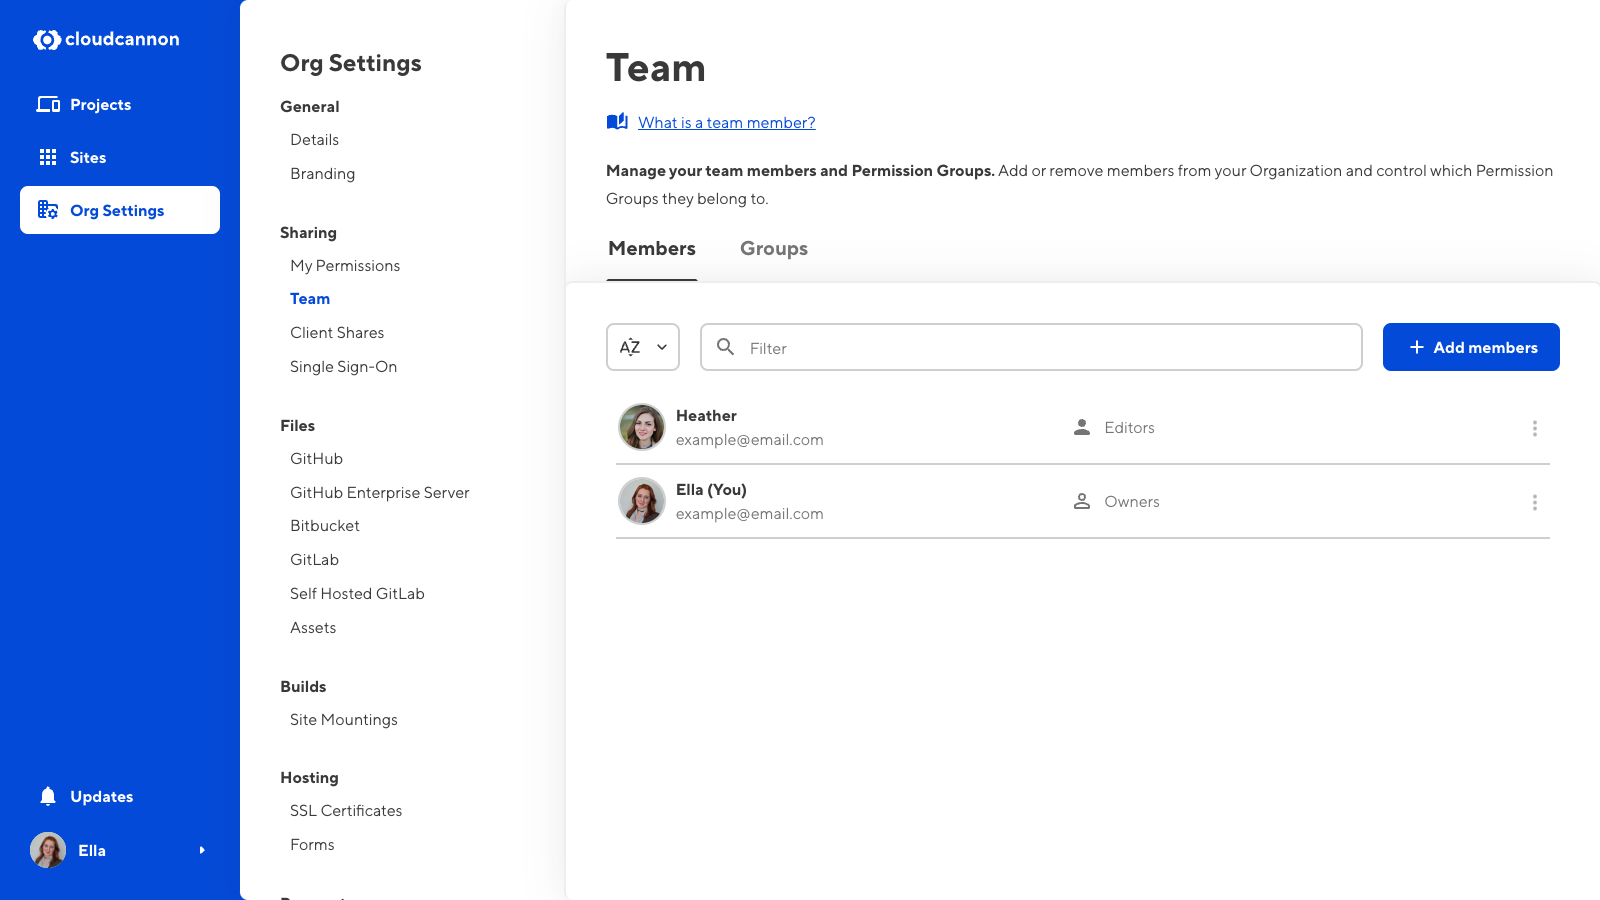 A screenshot of the Team page shows two team members and the + Add members button.